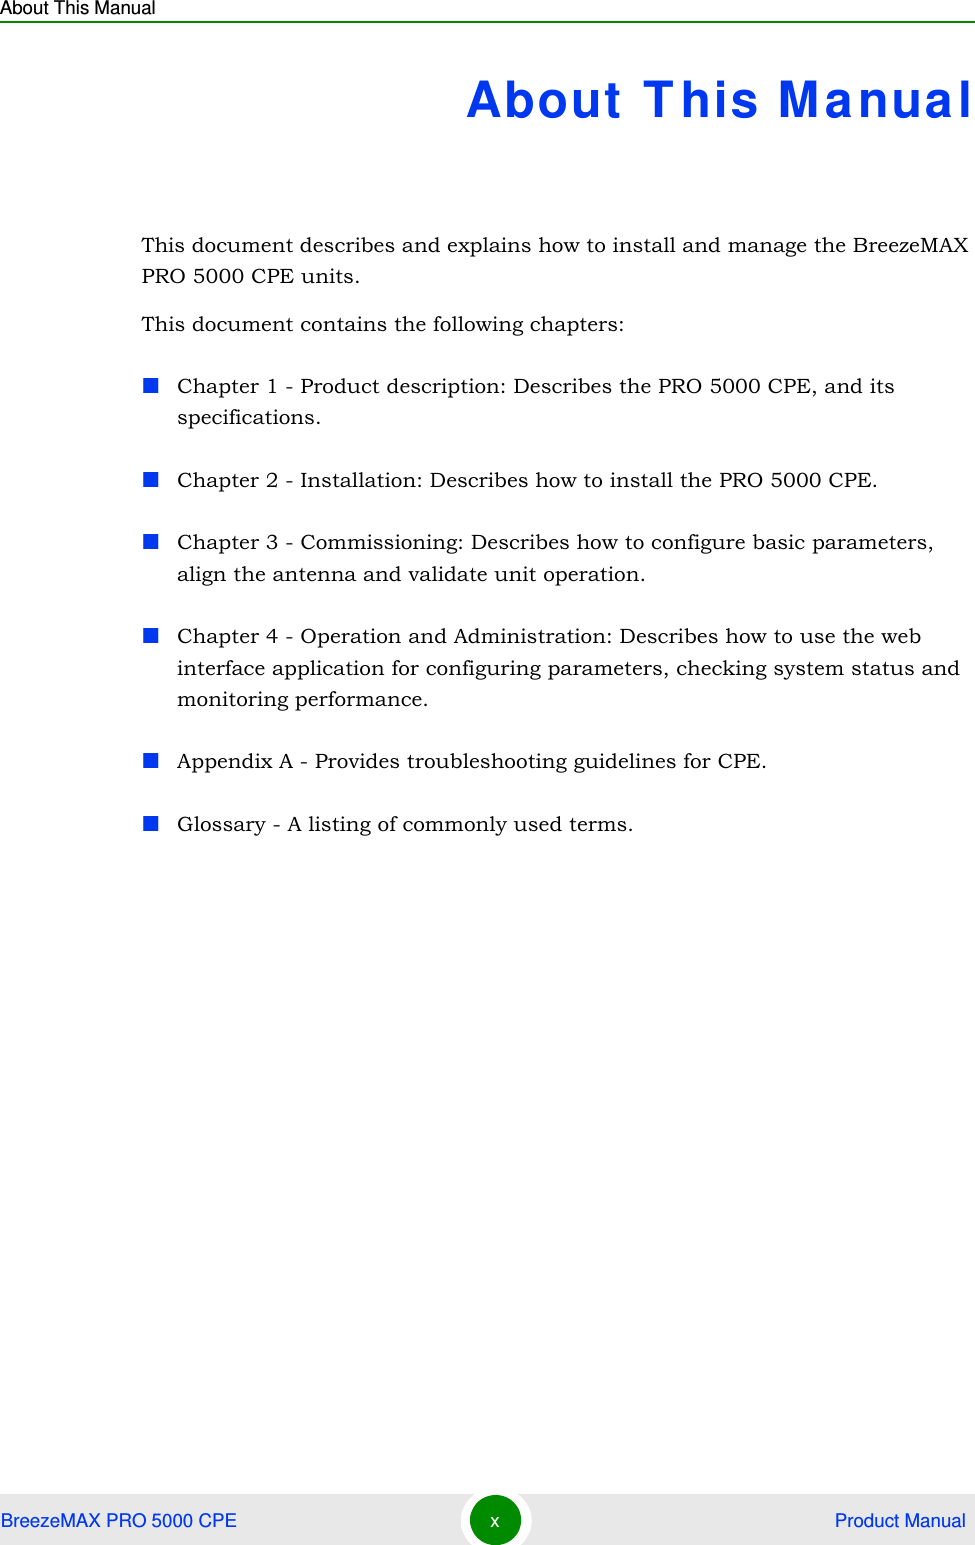 About This ManualBreezeMAX PRO 5000 CPE x Product ManualAbout T his ManualThis document describes and explains how to install and manage the BreezeMAX PRO 5000 CPE units.This document contains the following chapters:Chapter 1 - Product description: Describes the PRO 5000 CPE, and its specifications.Chapter 2 - Installation: Describes how to install the PRO 5000 CPE.Chapter 3 - Commissioning: Describes how to configure basic parameters, align the antenna and validate unit operation.Chapter 4 - Operation and Administration: Describes how to use the web interface application for configuring parameters, checking system status and monitoring performance. Appendix A - Provides troubleshooting guidelines for CPE. Glossary - A listing of commonly used terms.